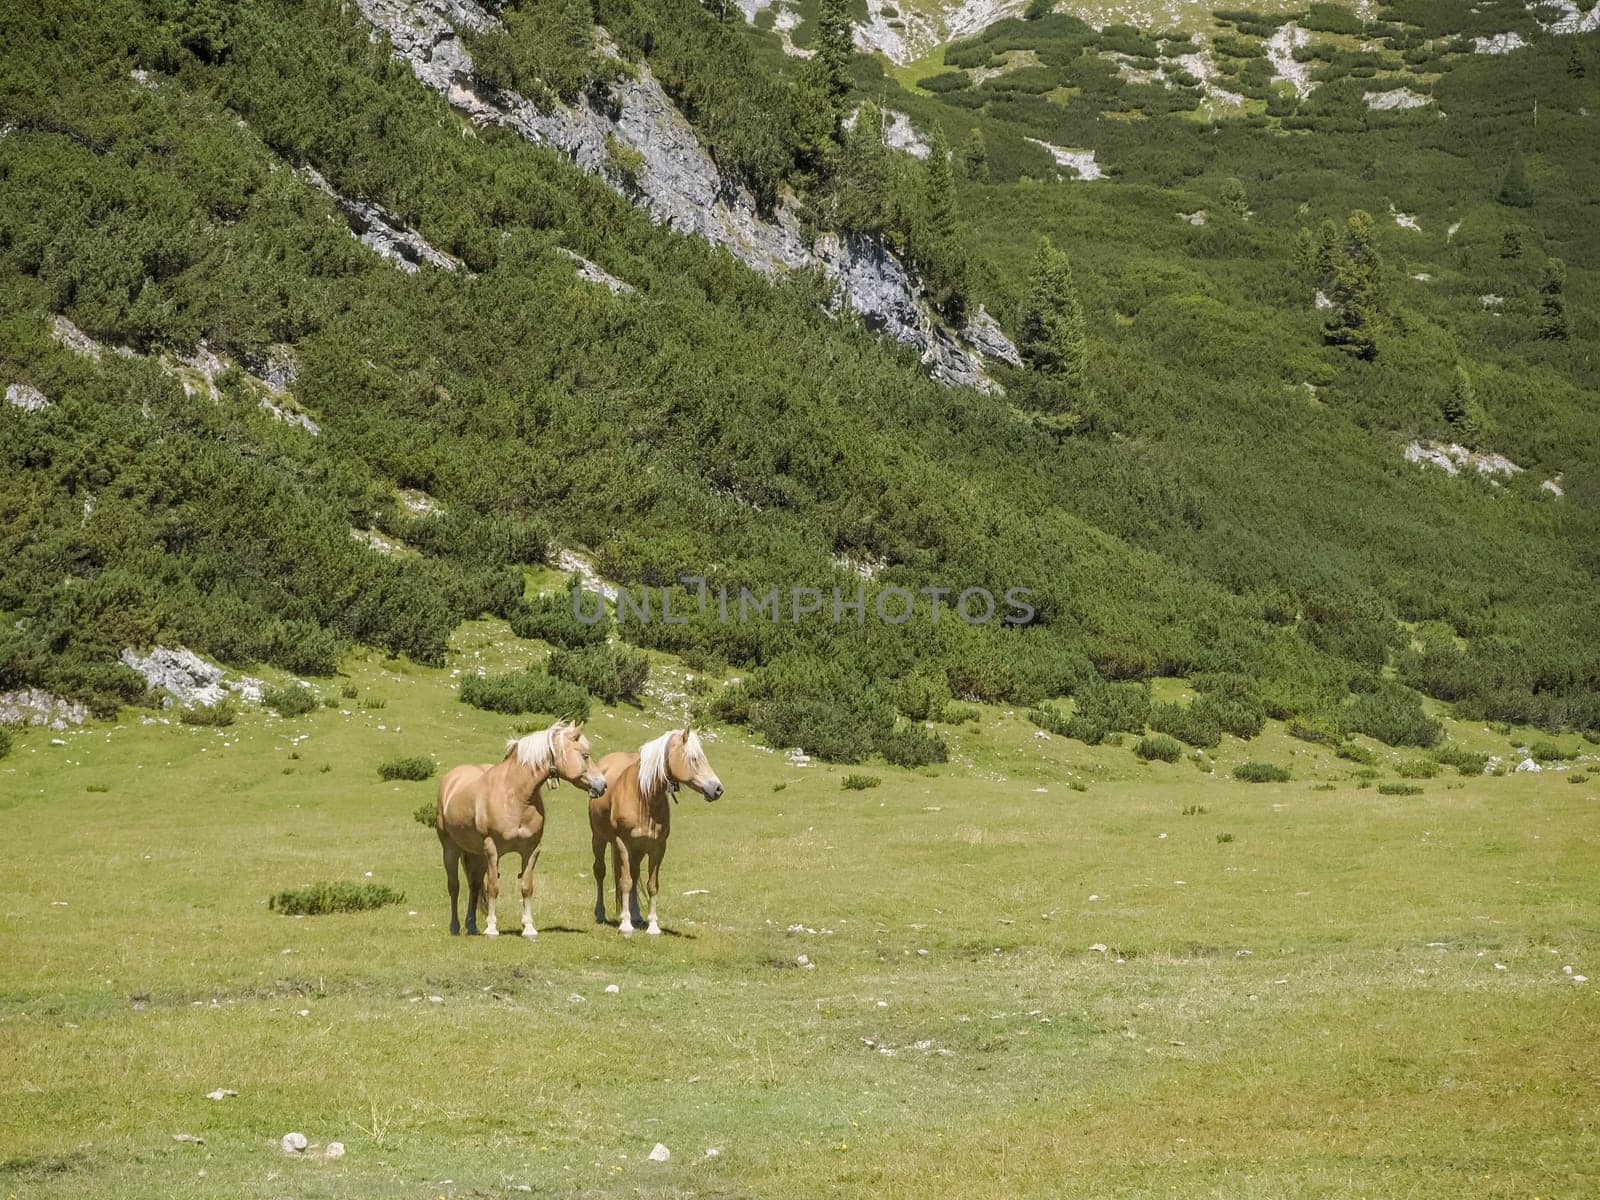 horses on grass in dolomites mountains background by AndreaIzzotti